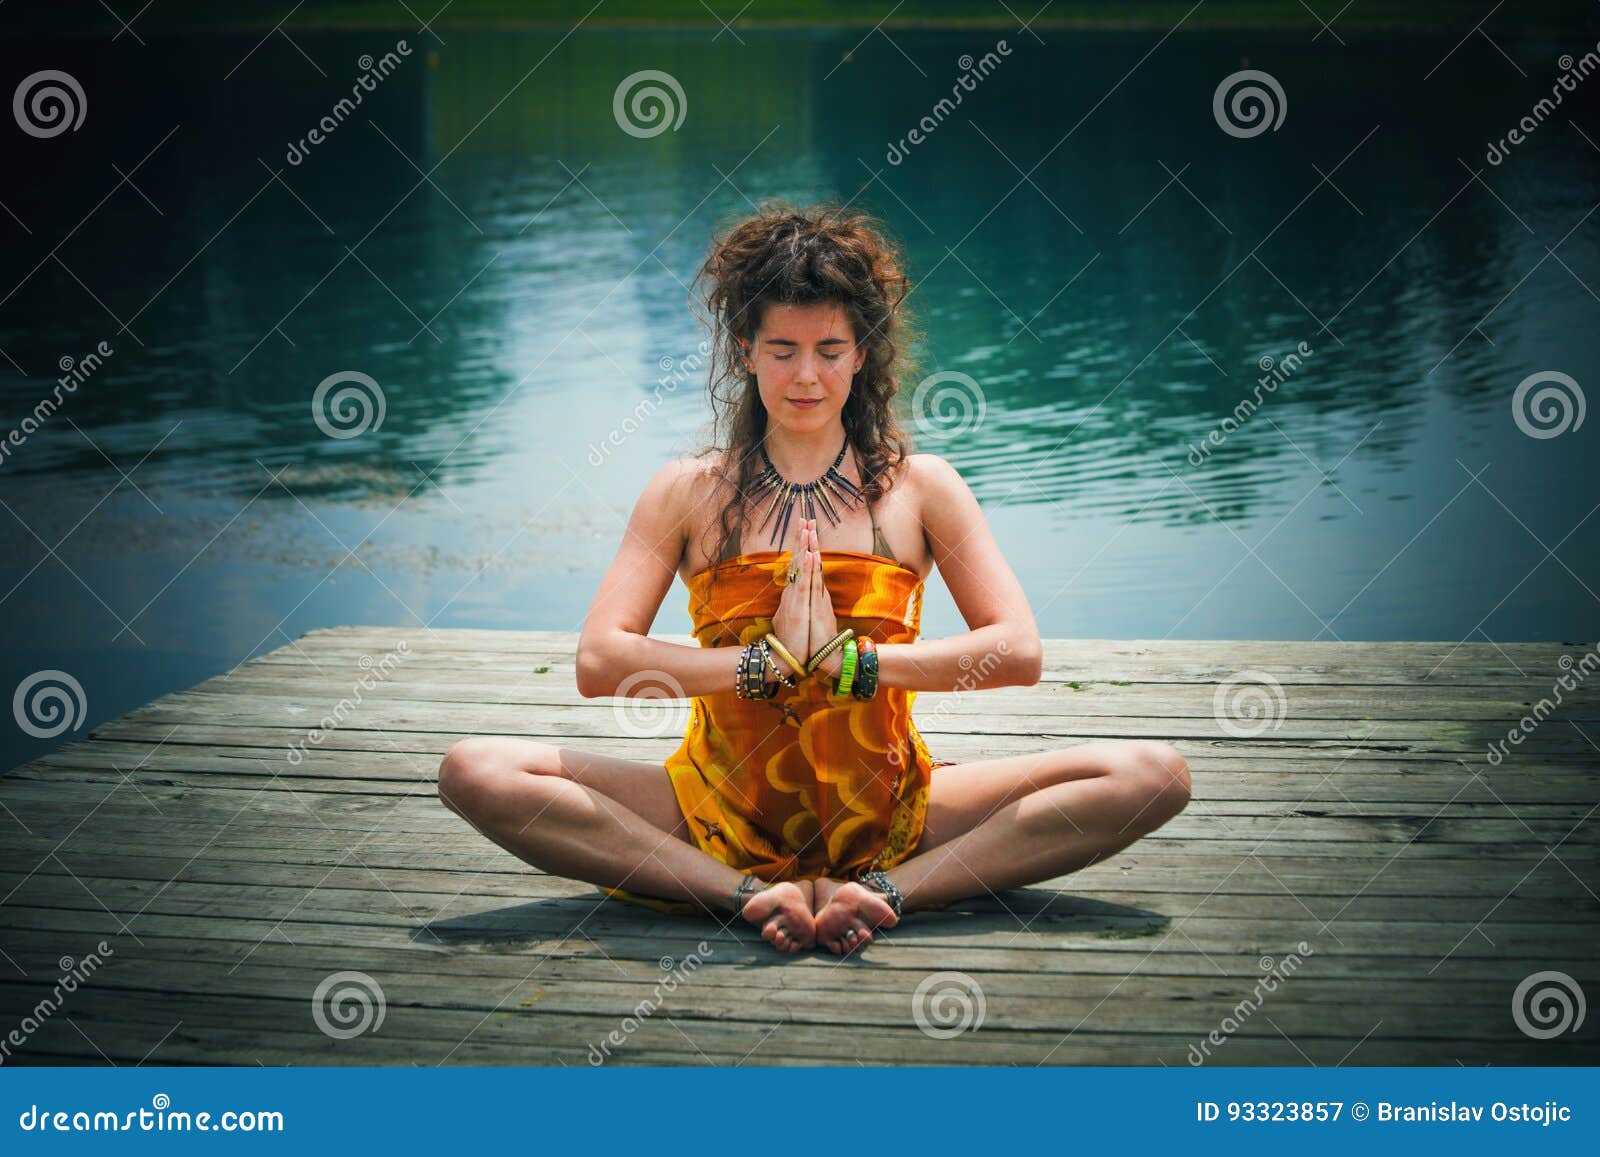 woman in a meditative yoga position by the lake